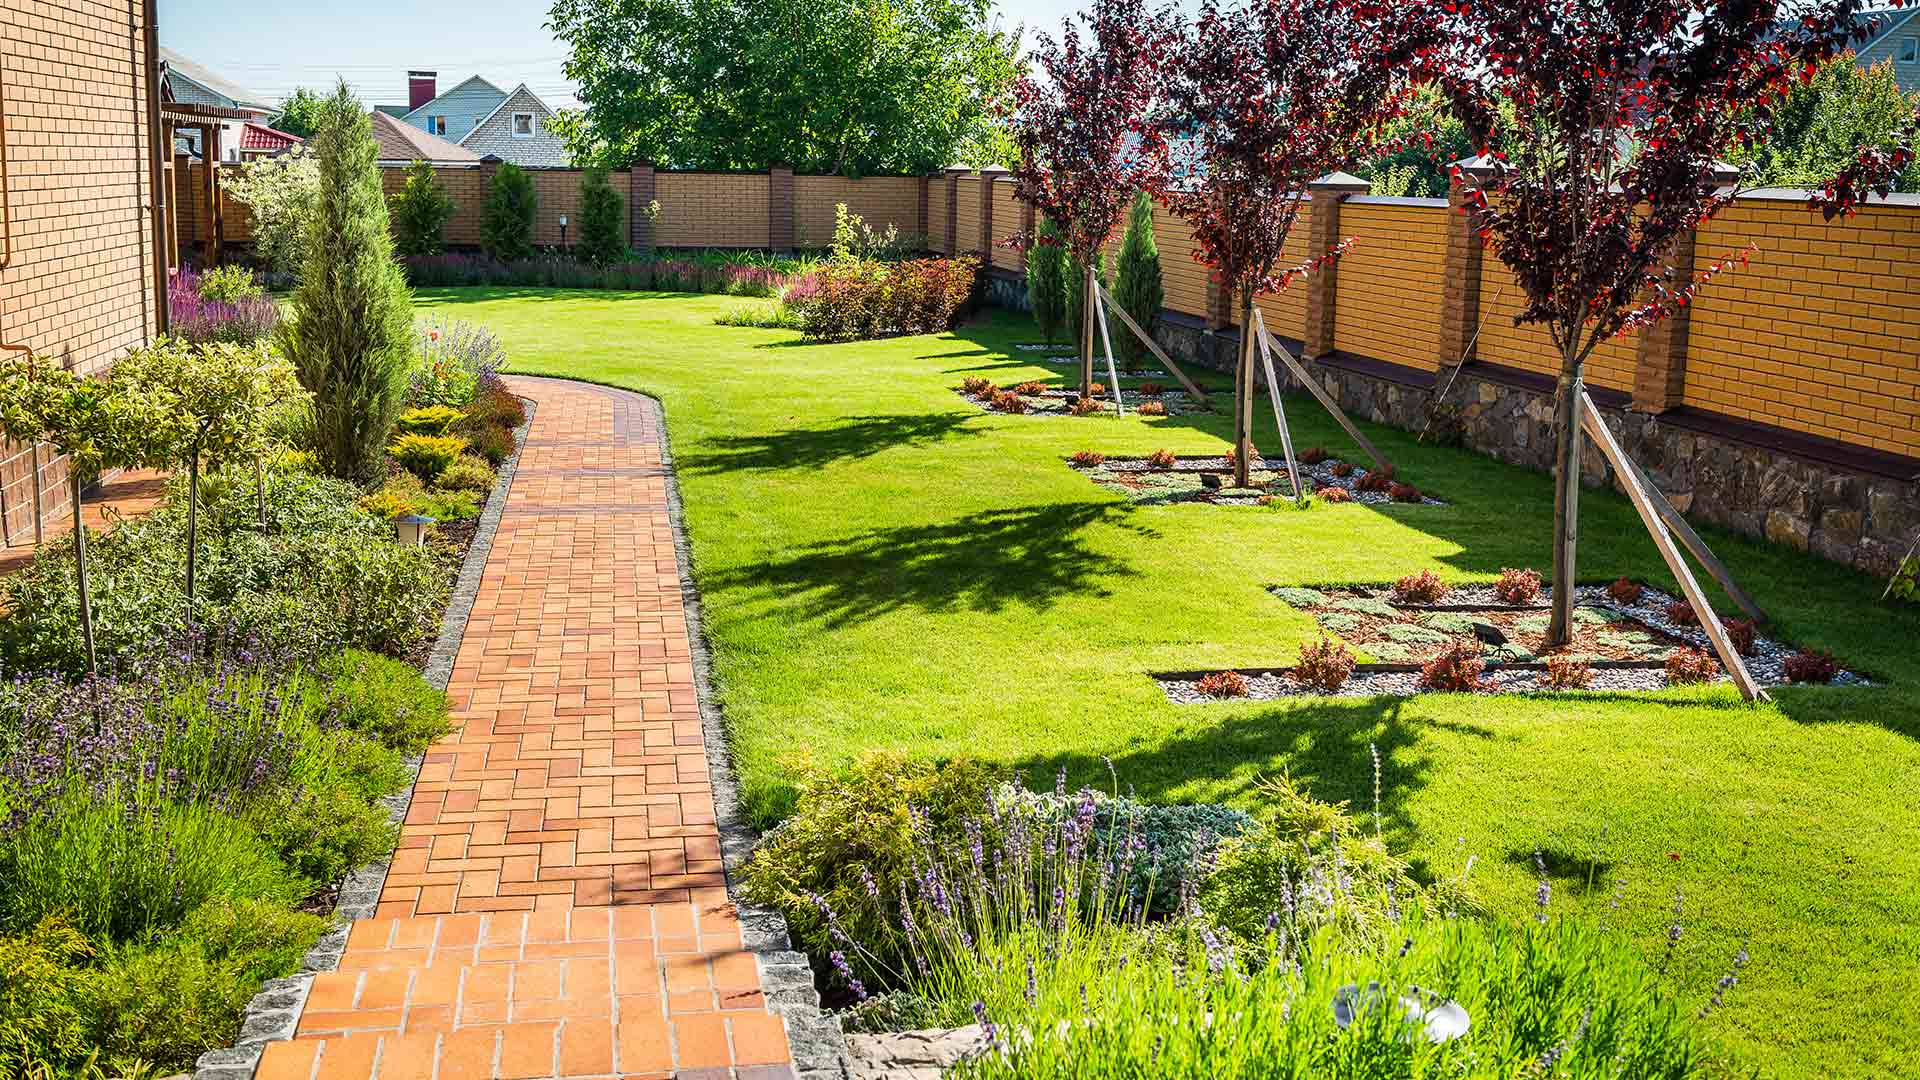 Stunning lawn, landscaping, and walkway in the back yard of a home in Matthews, NC.